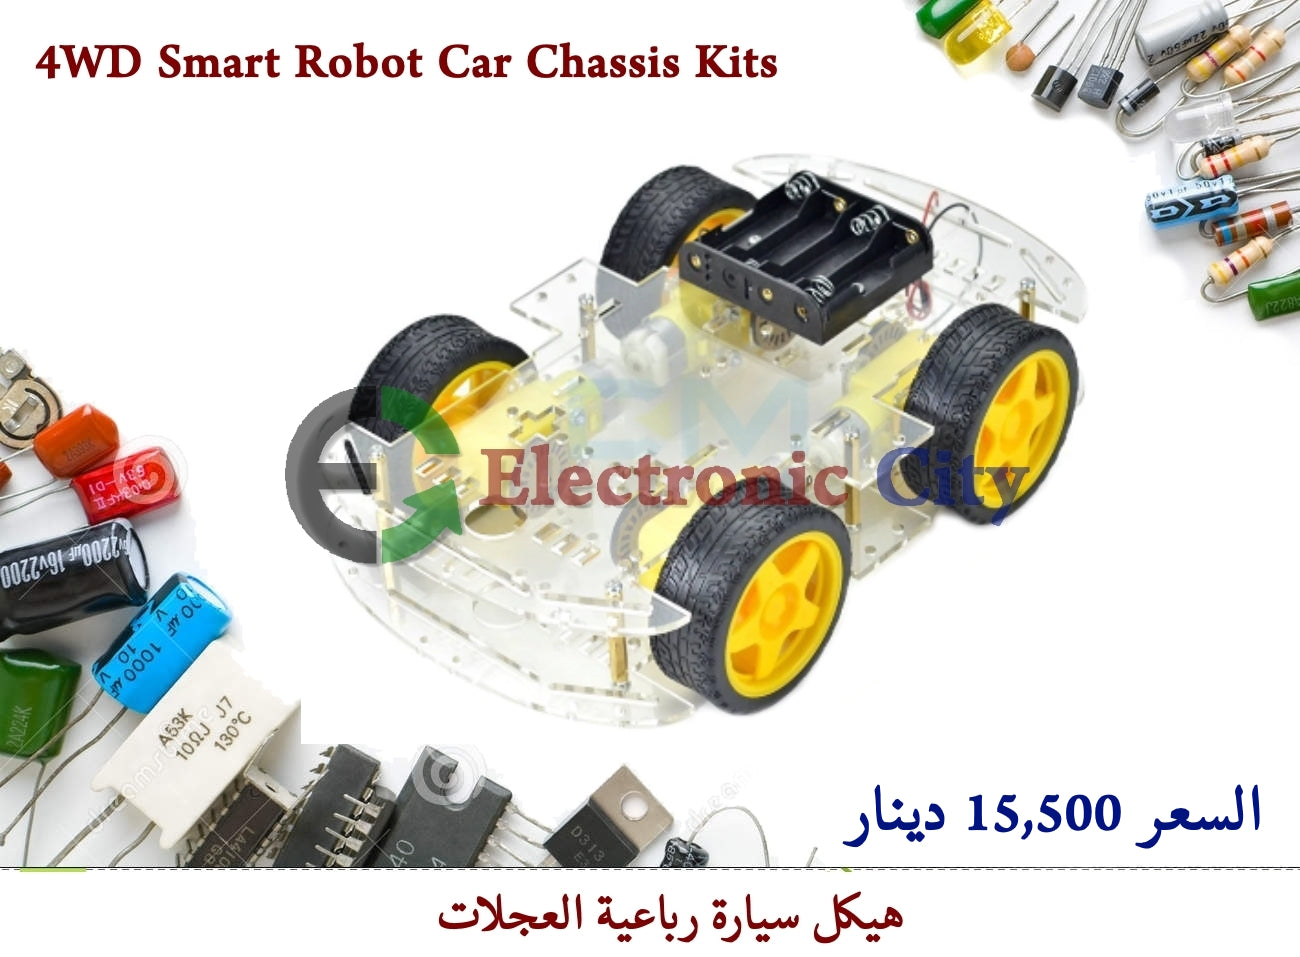 4WD Smart Robot Car Chassis Kits #Q